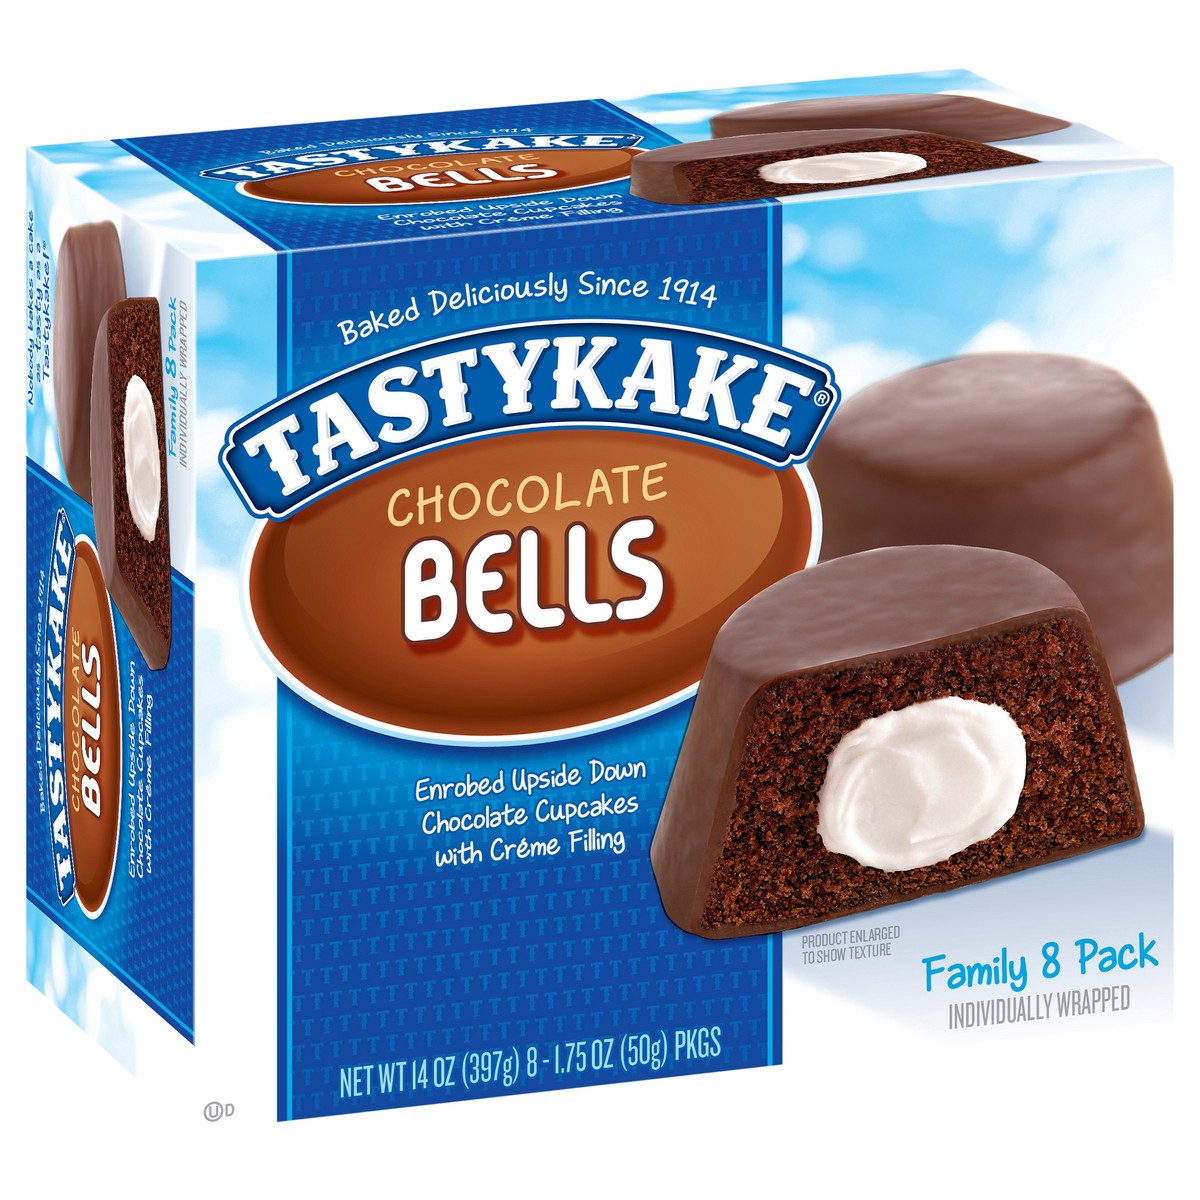 slide 7 of 17, Tastykake Creme Filled Chocolate Bells, 8 count, 8 Individually Wrapped Creme Filled Chocolate Cakes, 8 ct